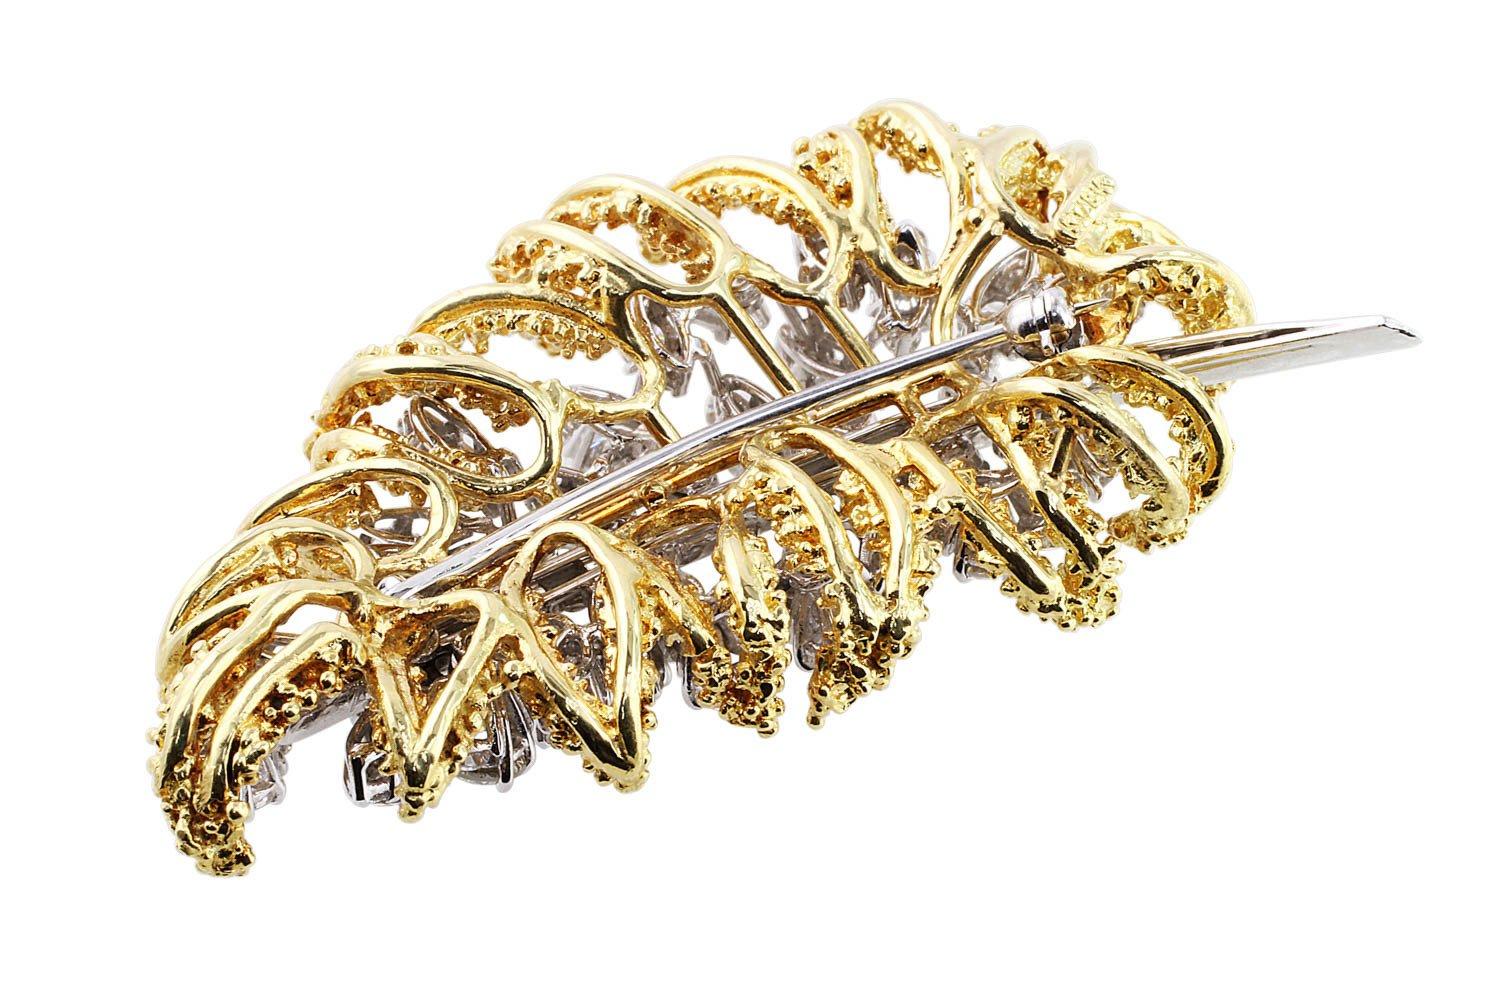 Diamond Leaf Brooch. Estate platinum and 18k yellow gold brooch with 81 brilliant cut diamonds and 18 tapered baguette-cut natural diamonds in the platinum setting. The 81 round brilliant cut diamonds are made up of 48 diamonds of 0.05cts each, 24